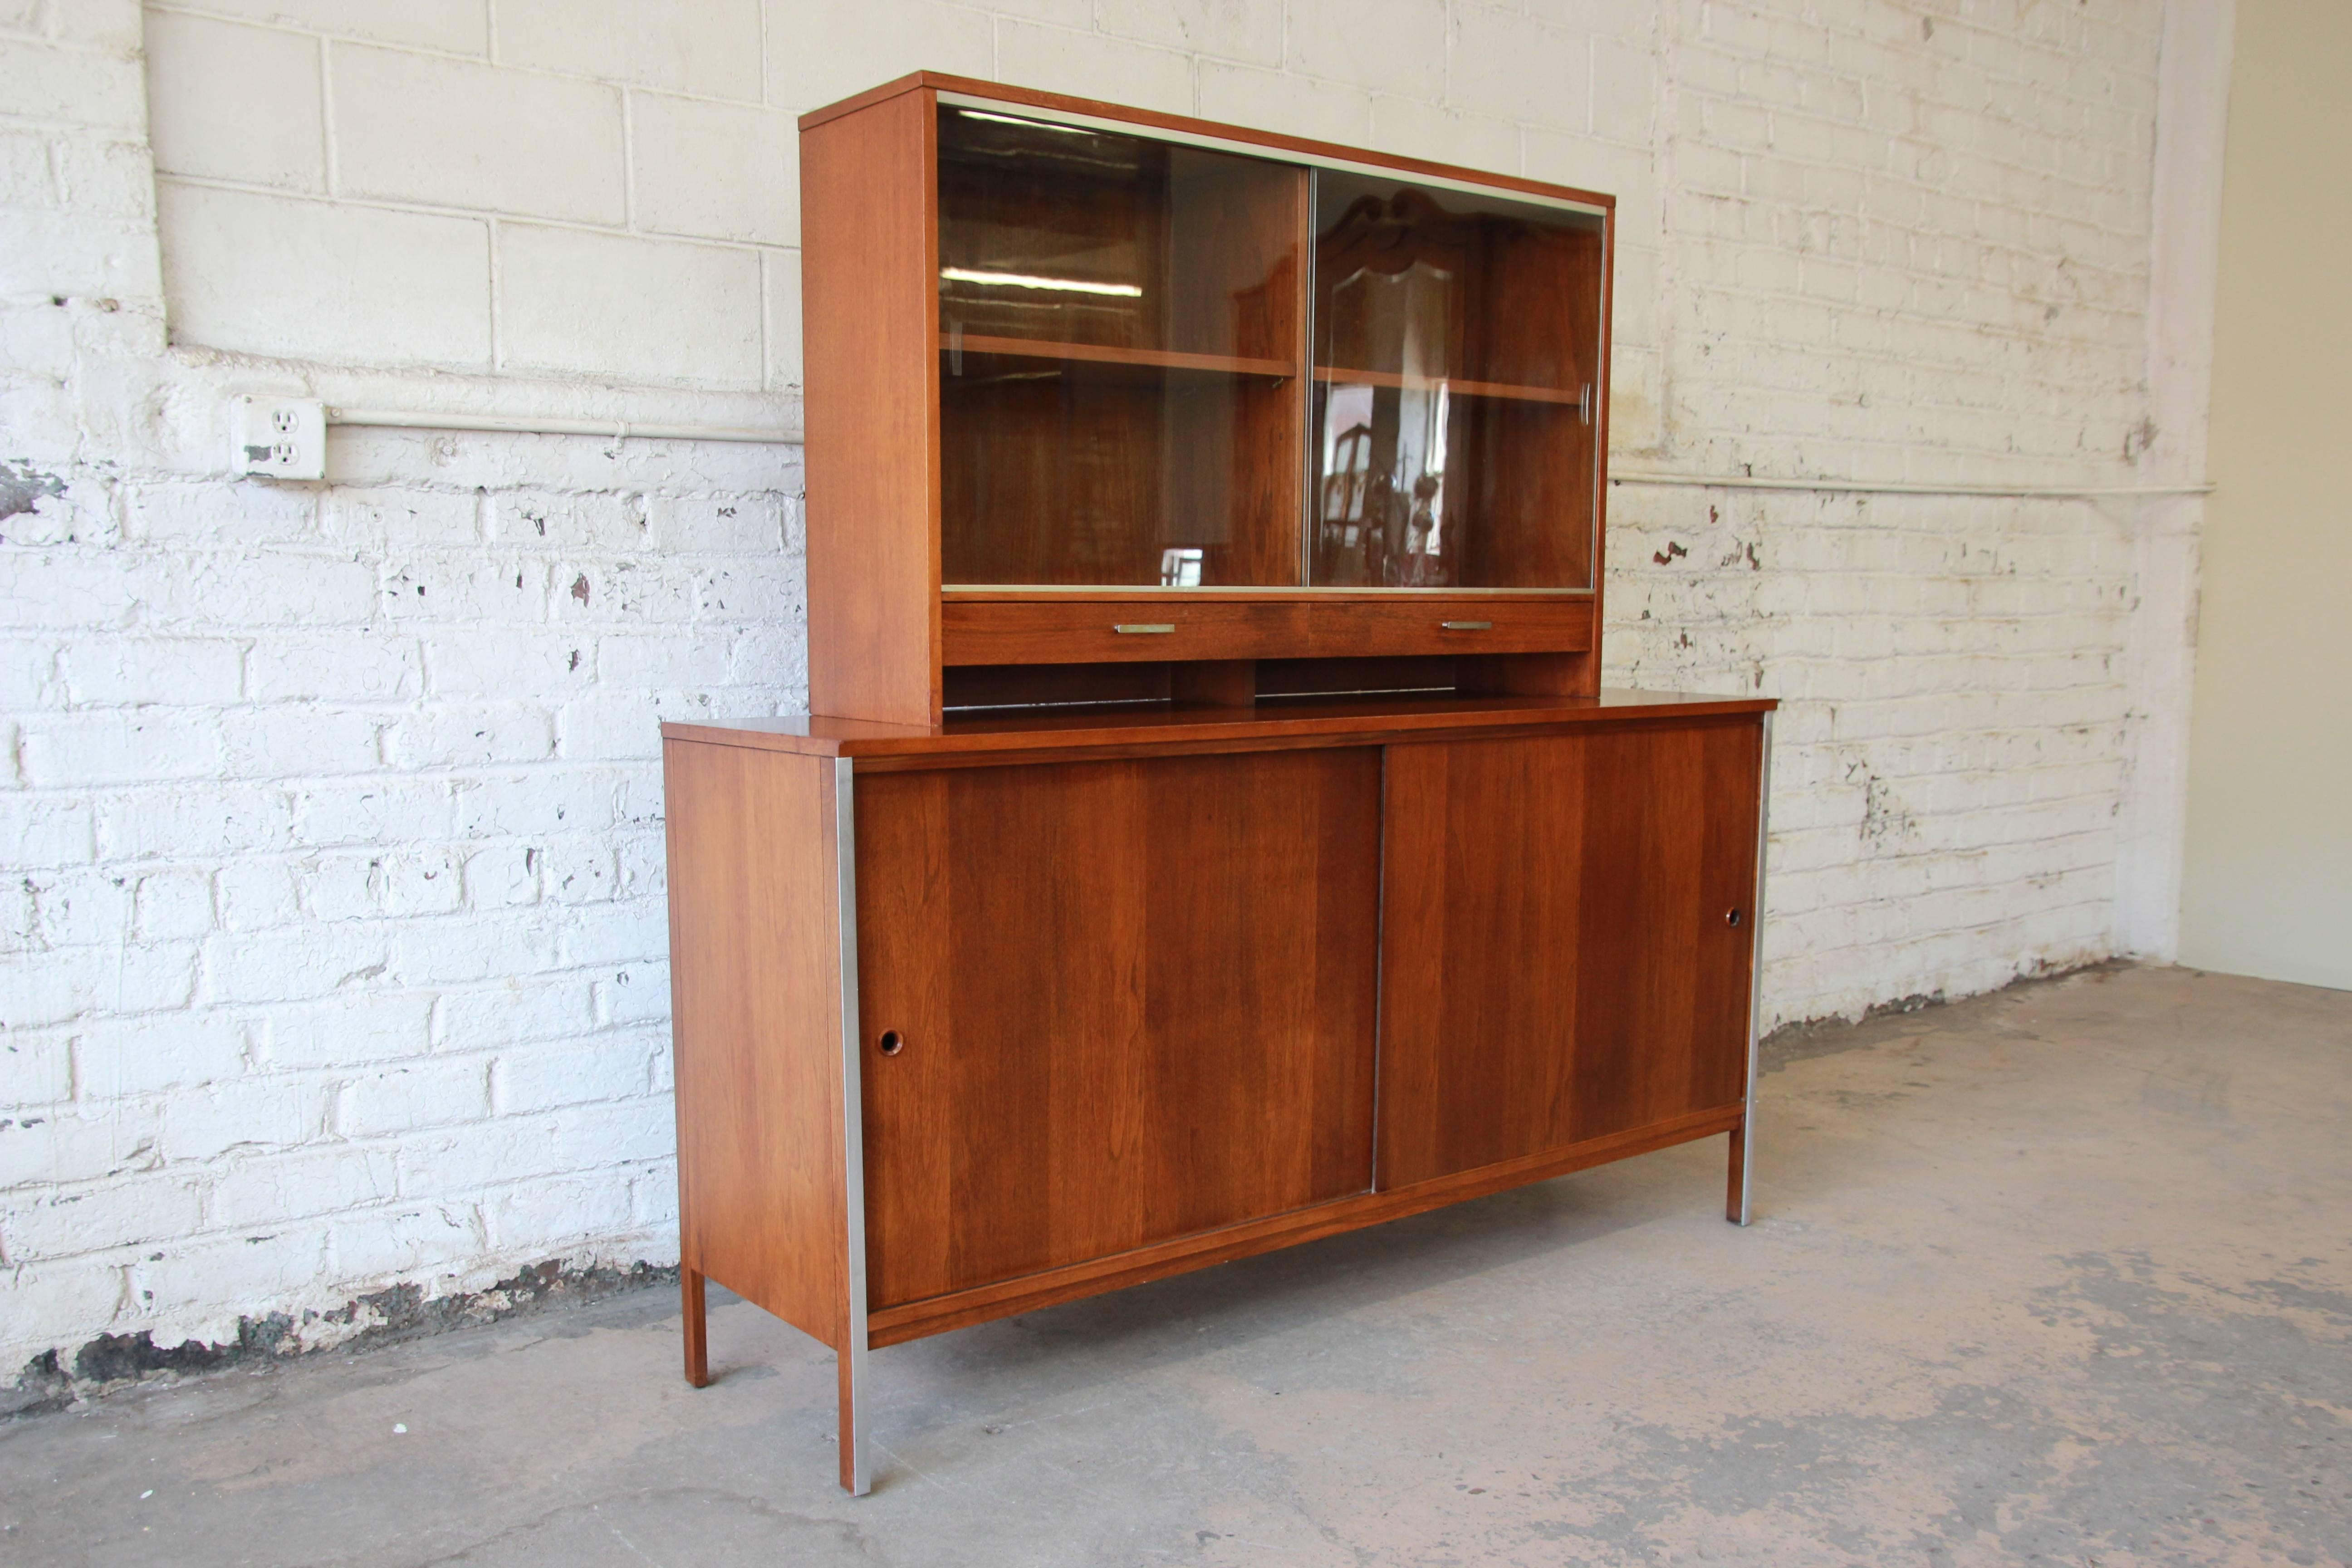 An outstanding Mid-Century Modern walnut credenza or sideboard designed by Paul McCobb for Calvin, circa 1950s. The credenza was designed as part of McCobb's popular 